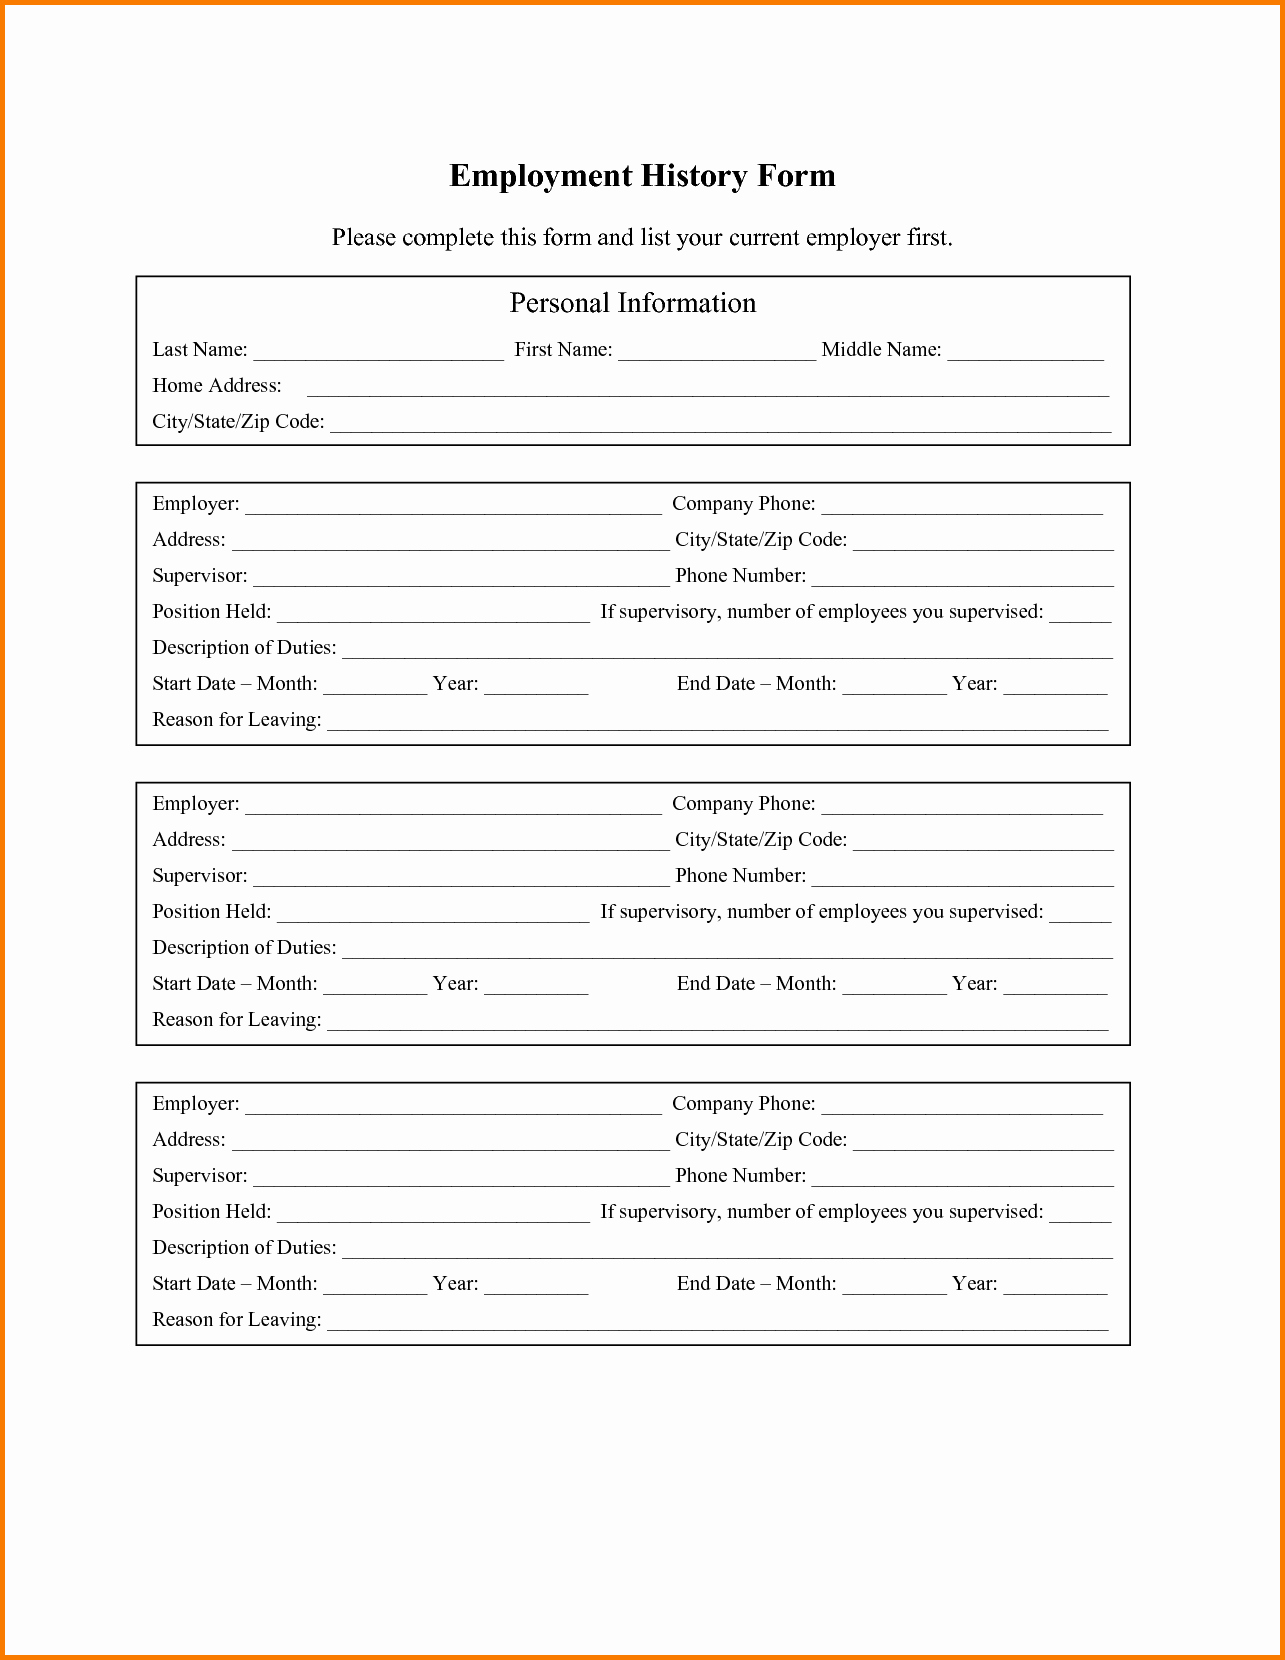 Employment History form Template Lovely Employment History form